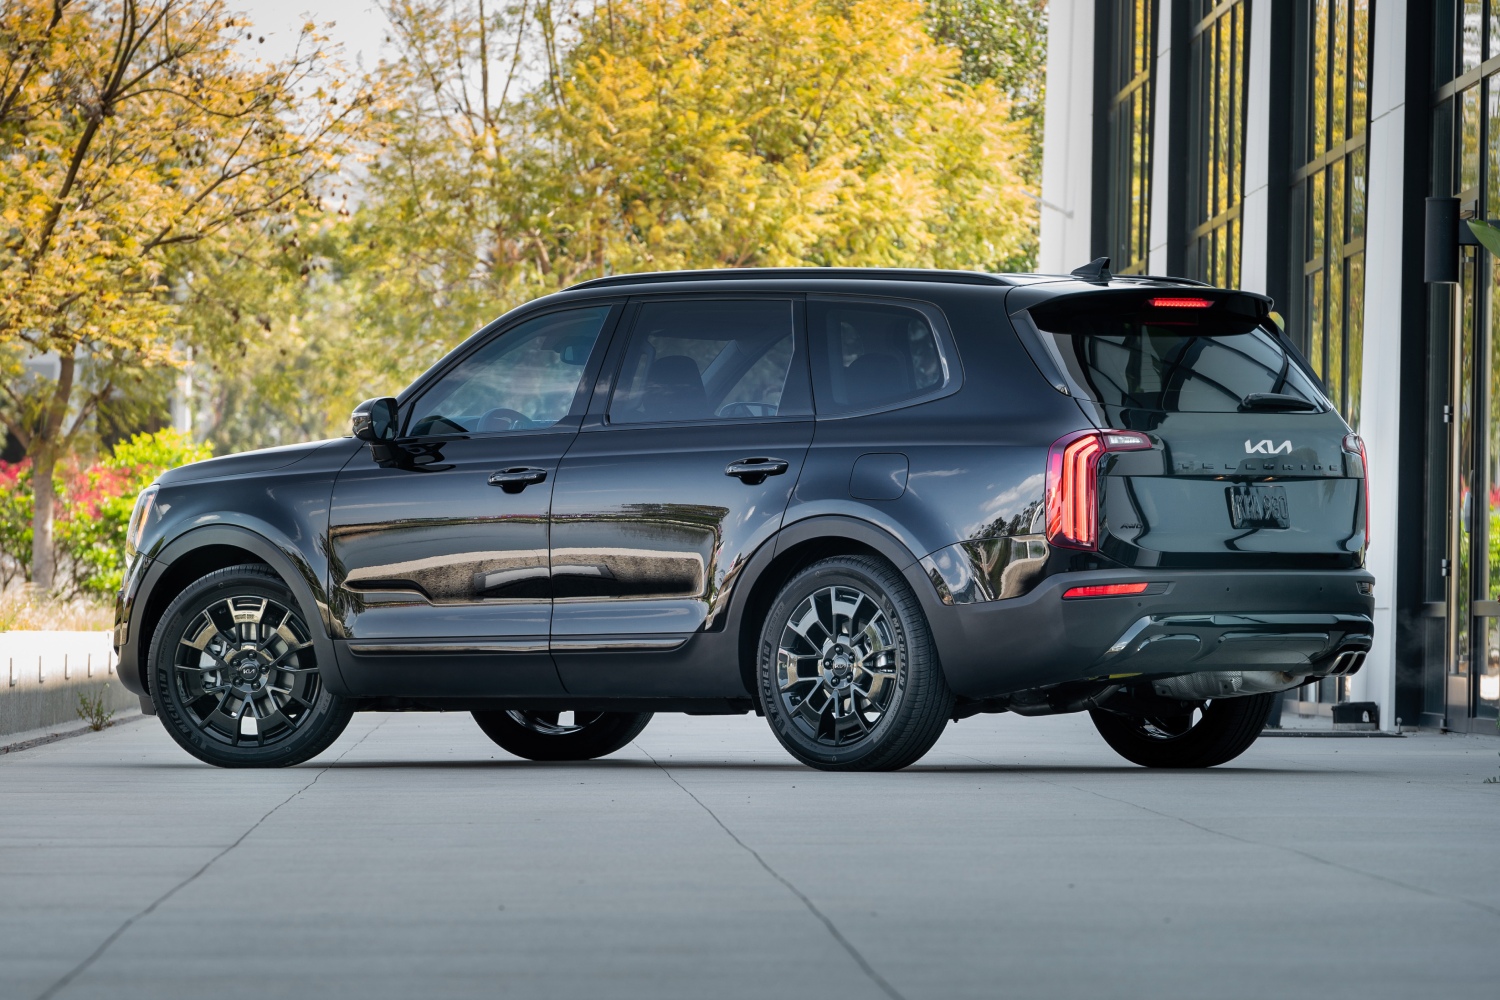 The most reliable and popular SUVs include the Kia Telluride